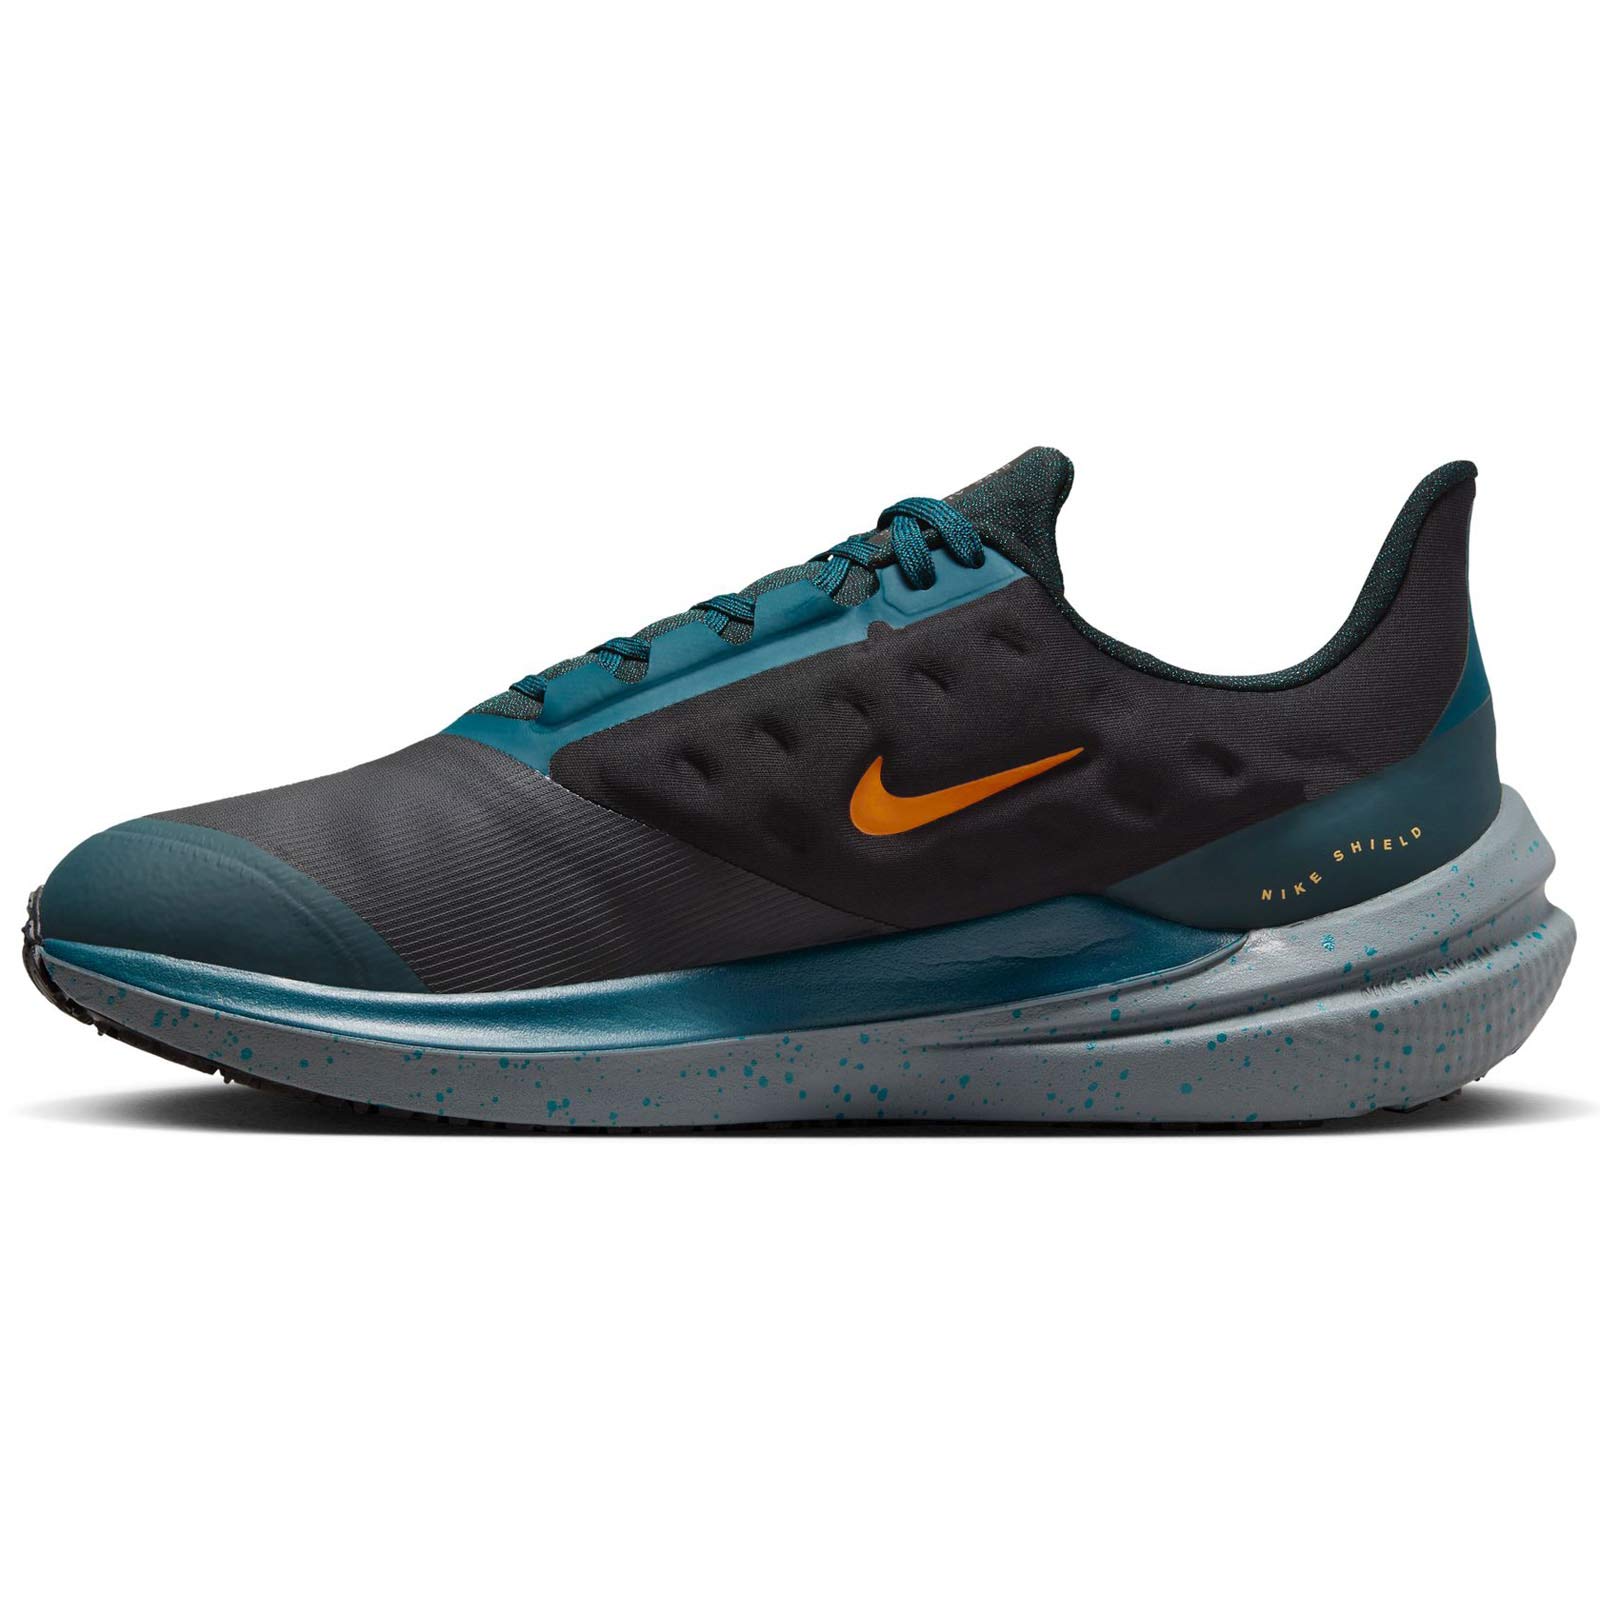 Nike Air Winflo 9 Shield Mens Weatherized Road Running Shoes | Men's ...